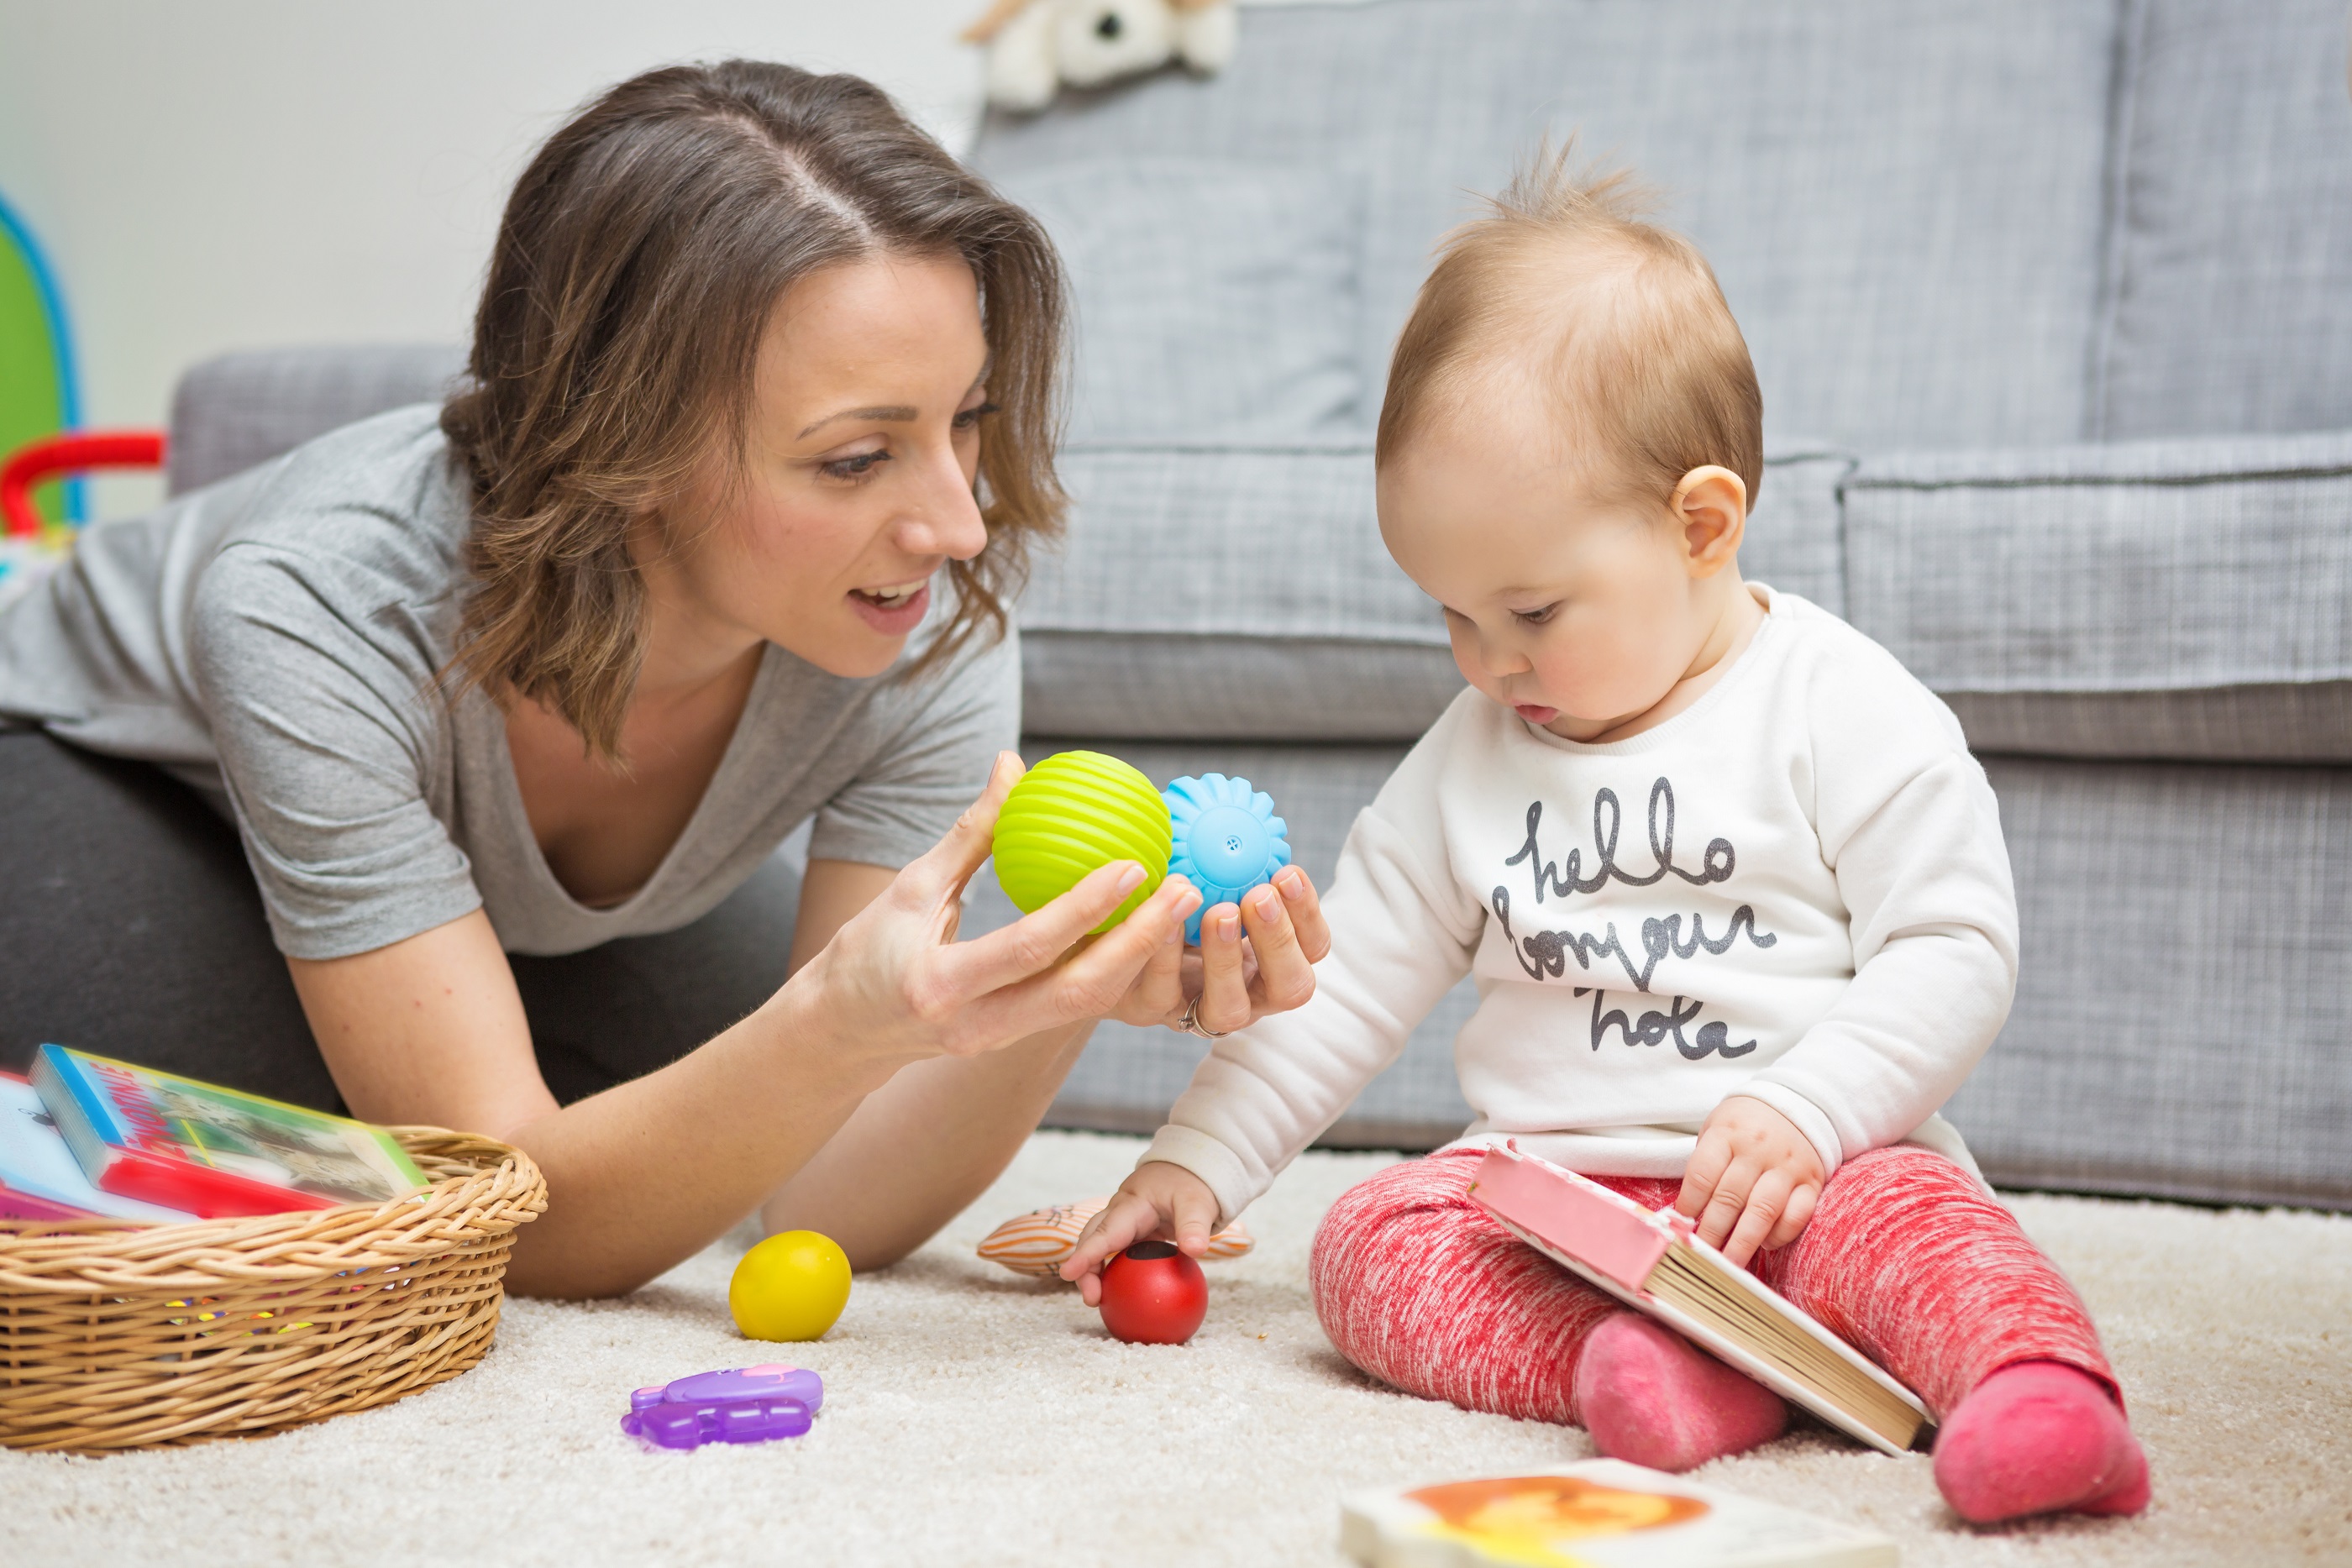 Baby Sitting Development: How to Grow Your Skills as a Babysitter